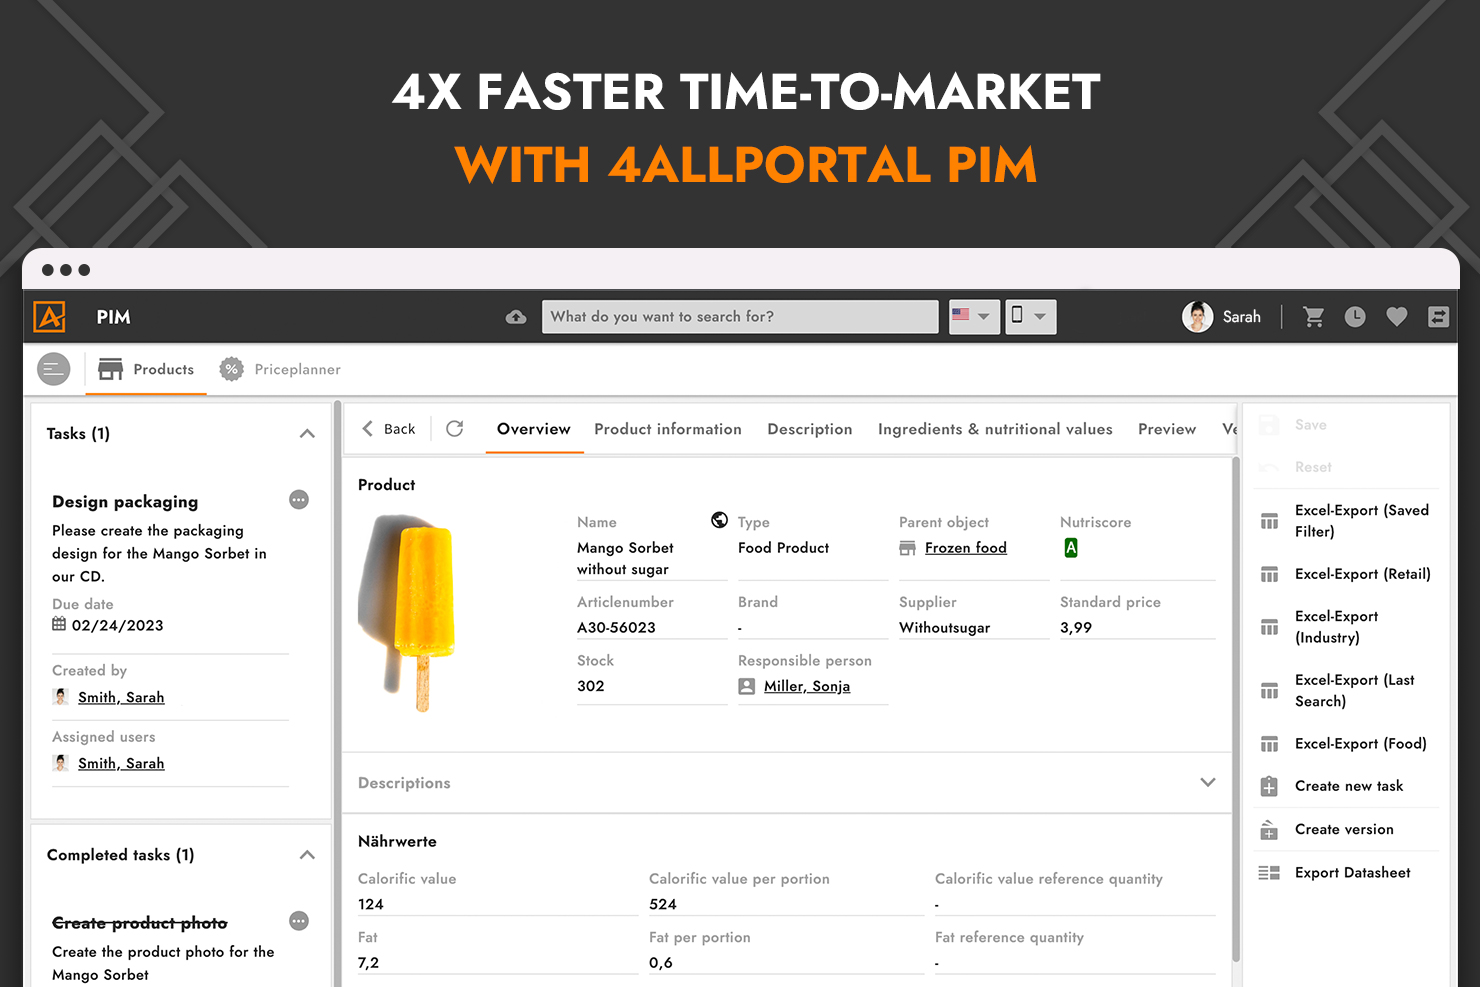 Extend your 4ALLPORTAL with the PIM to manage the information about your products. Synchronise your information with other teams, channels and service providers.